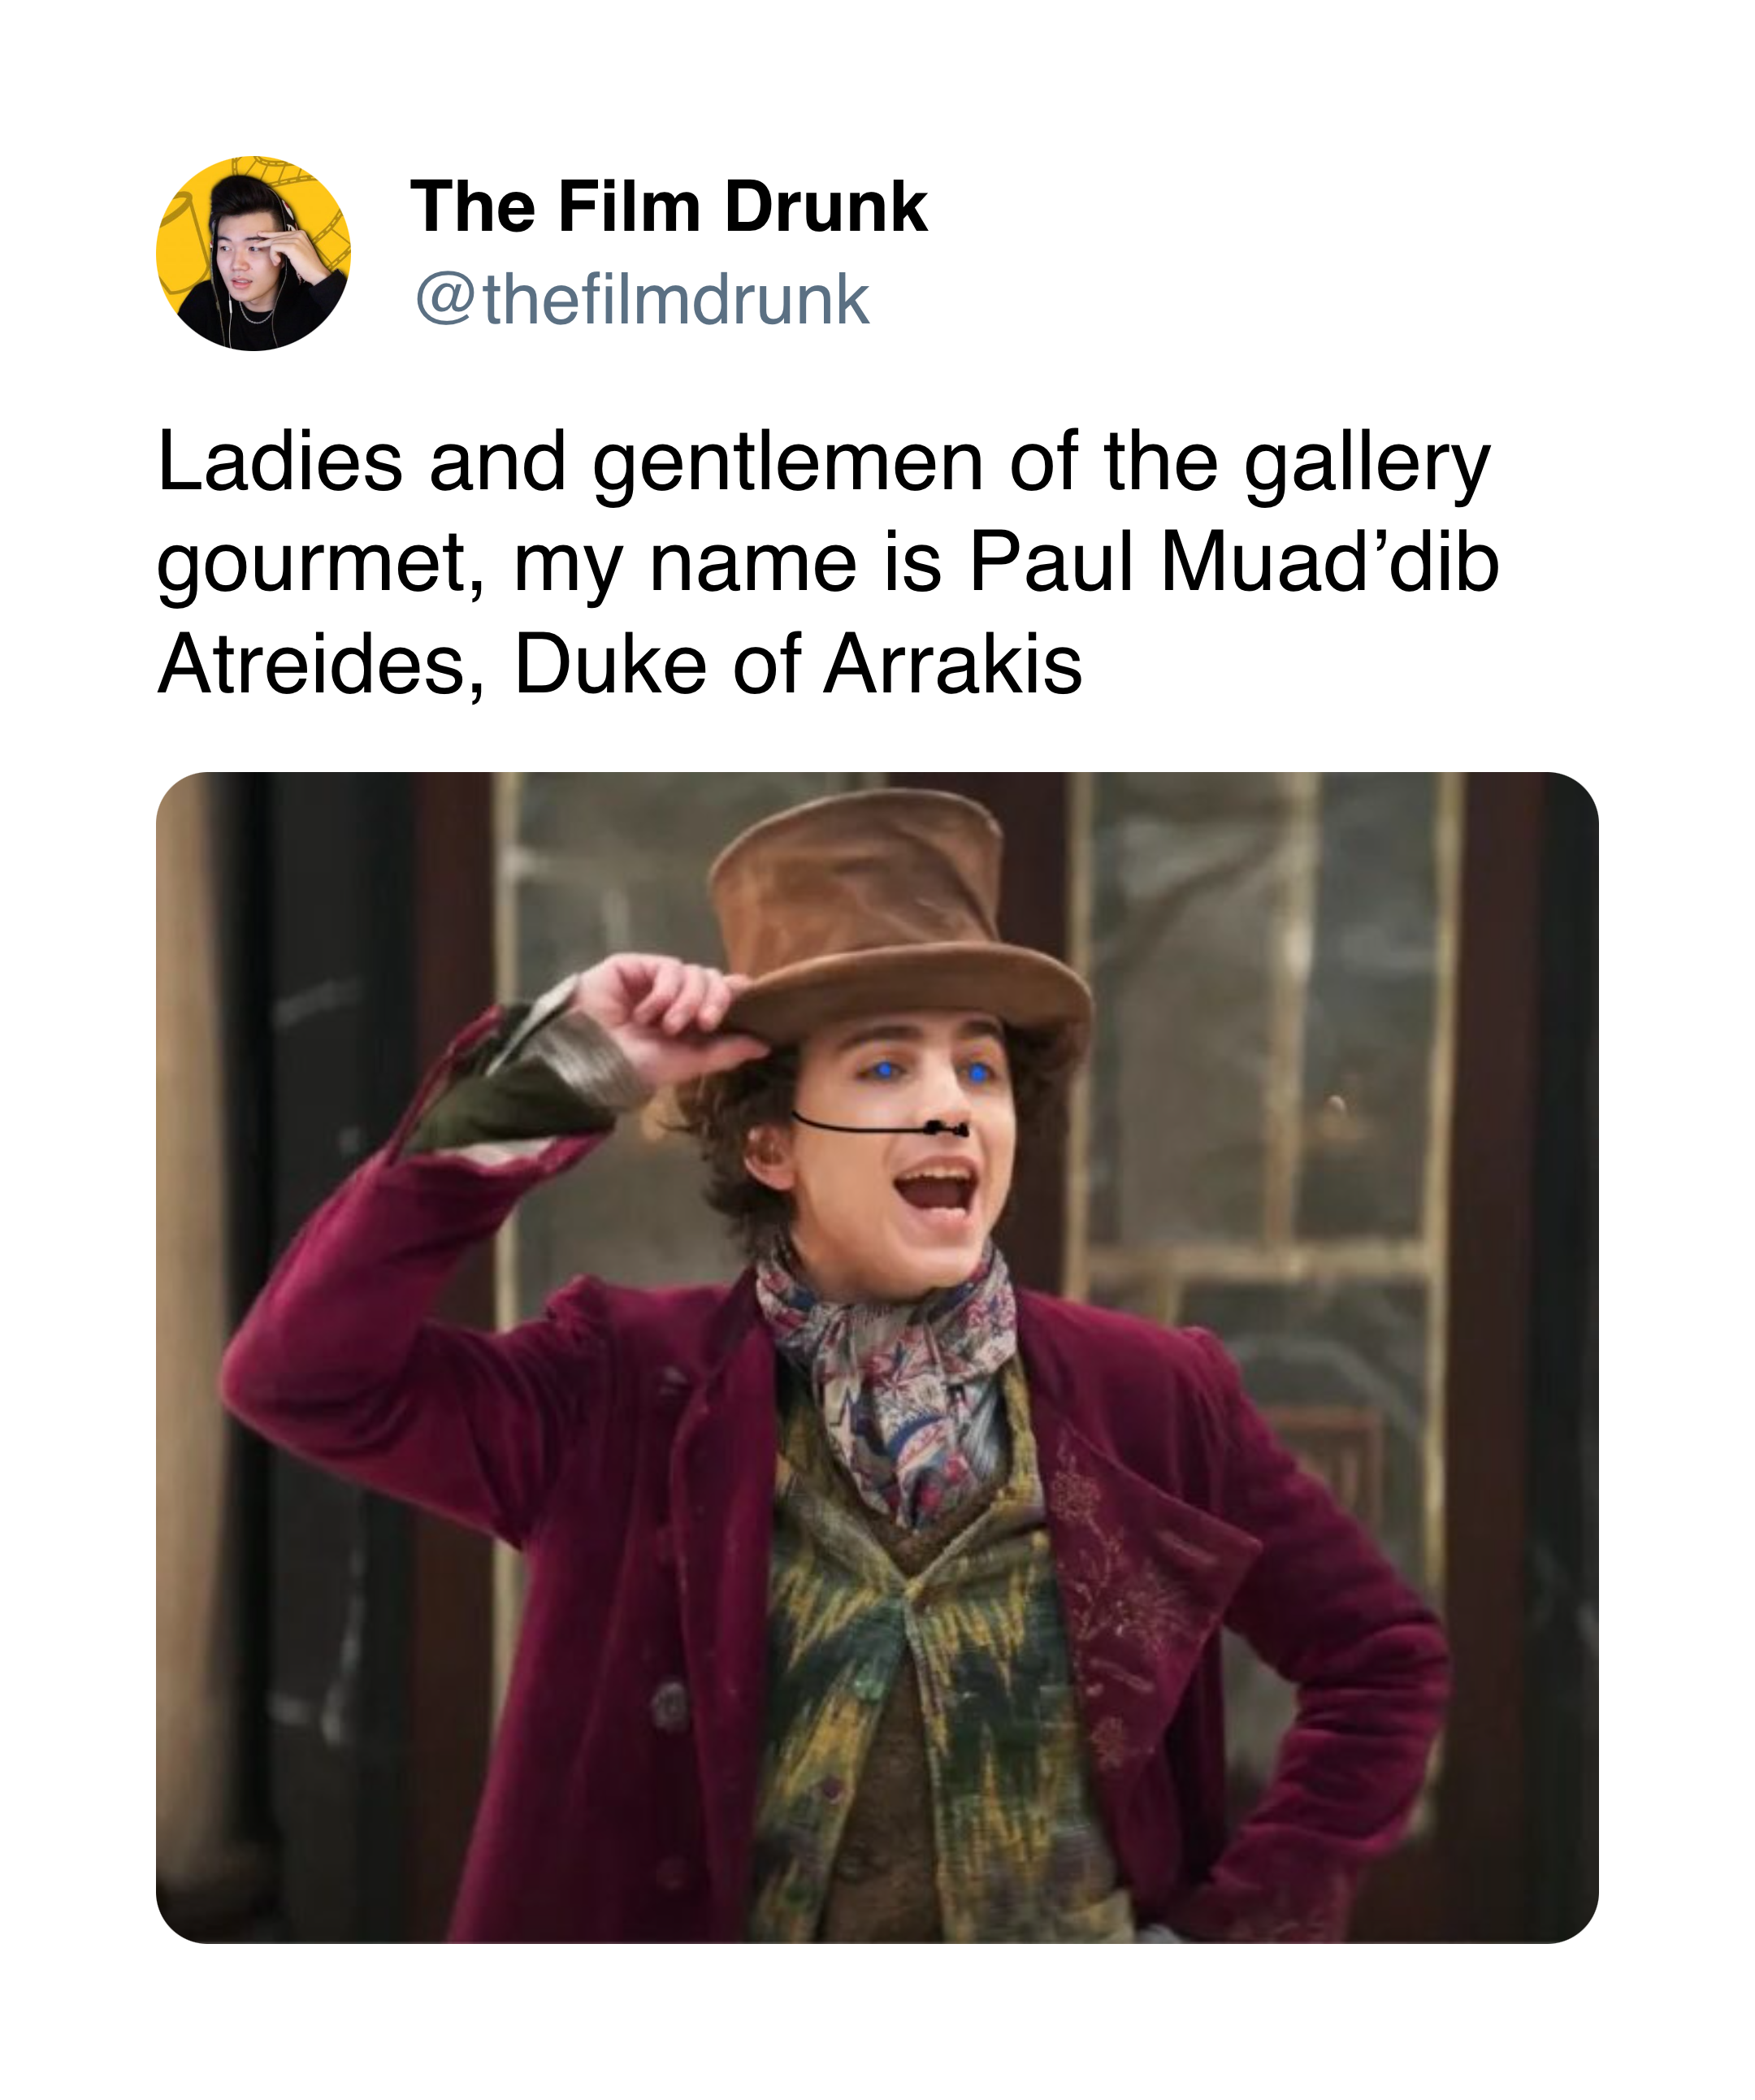 @thefilmdrunk on Twitter: A photoshopped picture of Timothée Chalamet from Wonka with blue eyes and a stillsuit nose plug. "Ladies and gentlemen of the gallery gourmet, my name is Paul Muad’dib Atreides, Duke of Arrakis"